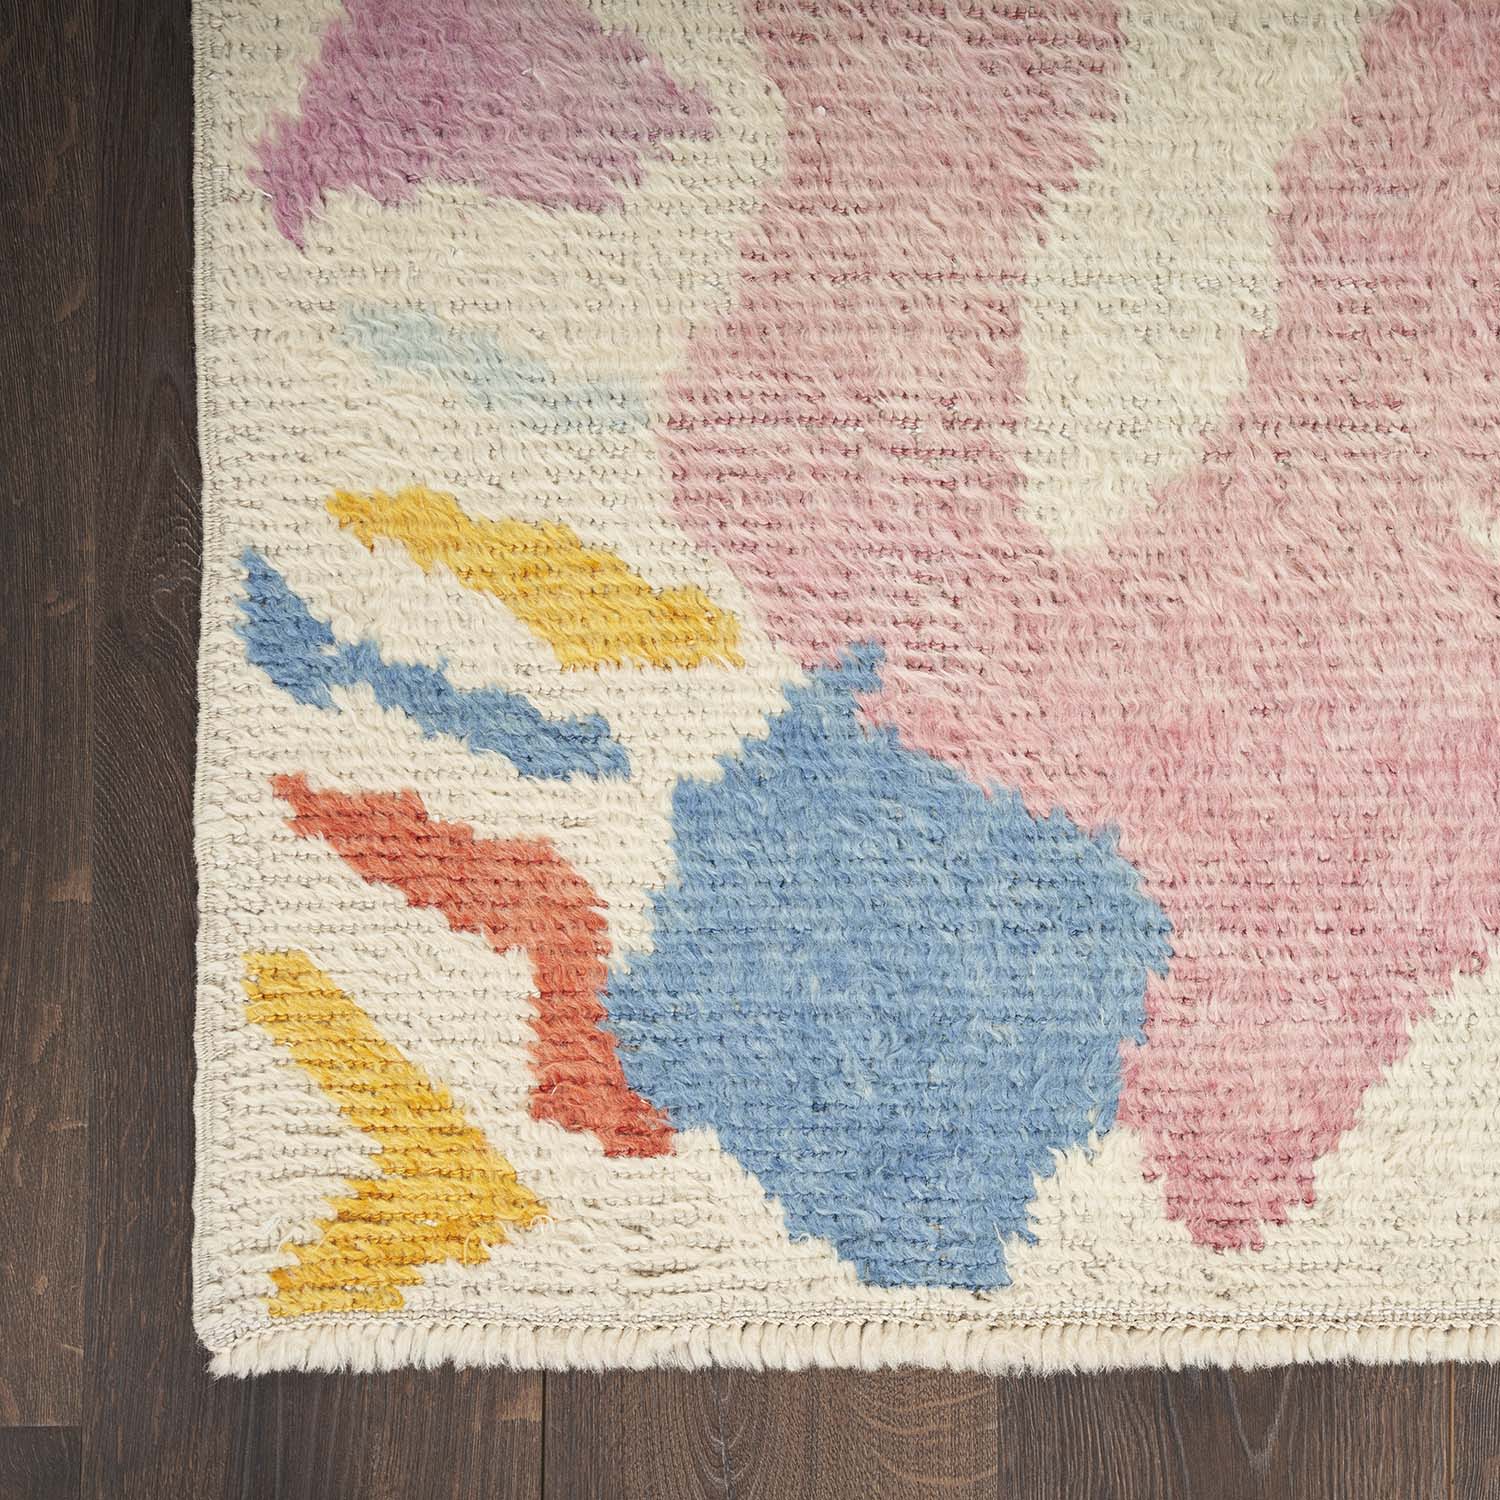 Abstract, multicolored handcrafted rug with plush texture and cozy vibe.